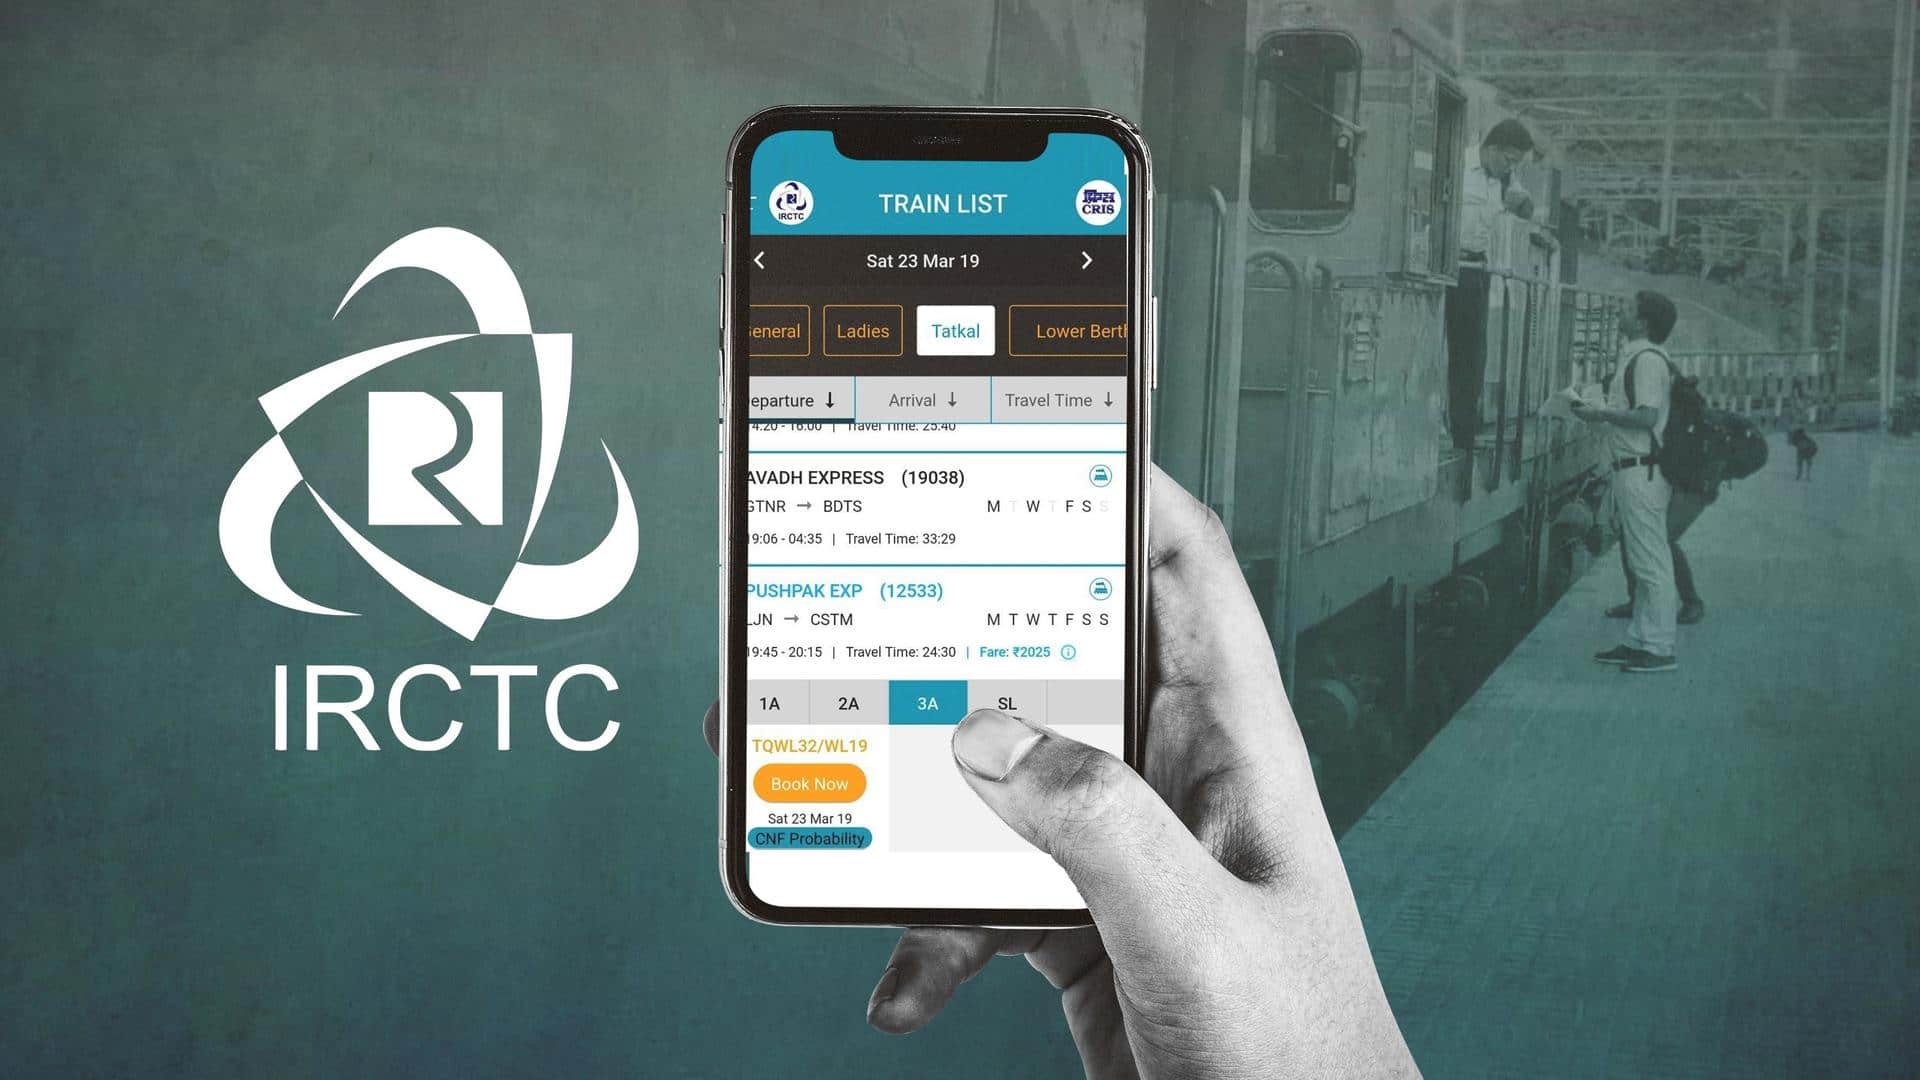 IRCTC: Tips, tricks to book confirmed Tatkal tickets online